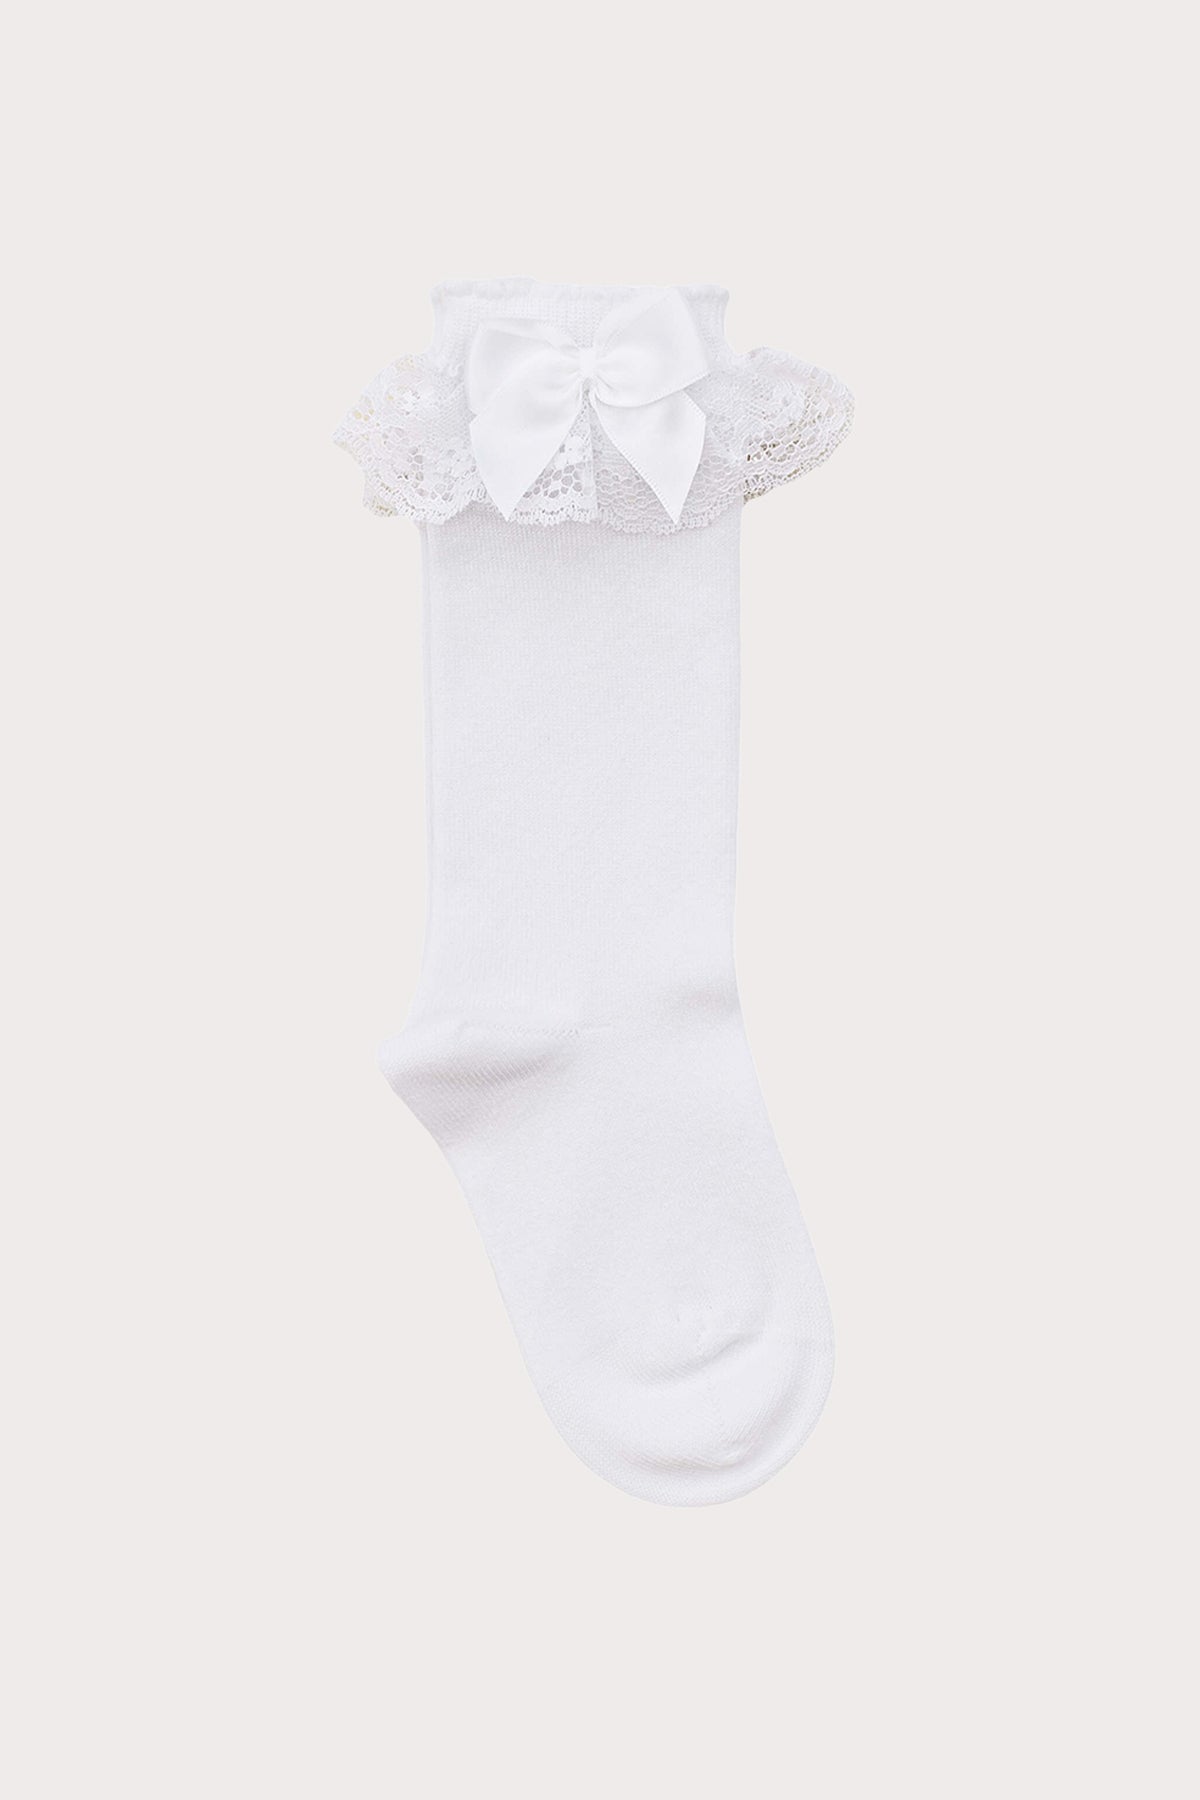 girls lace topped knee high socks